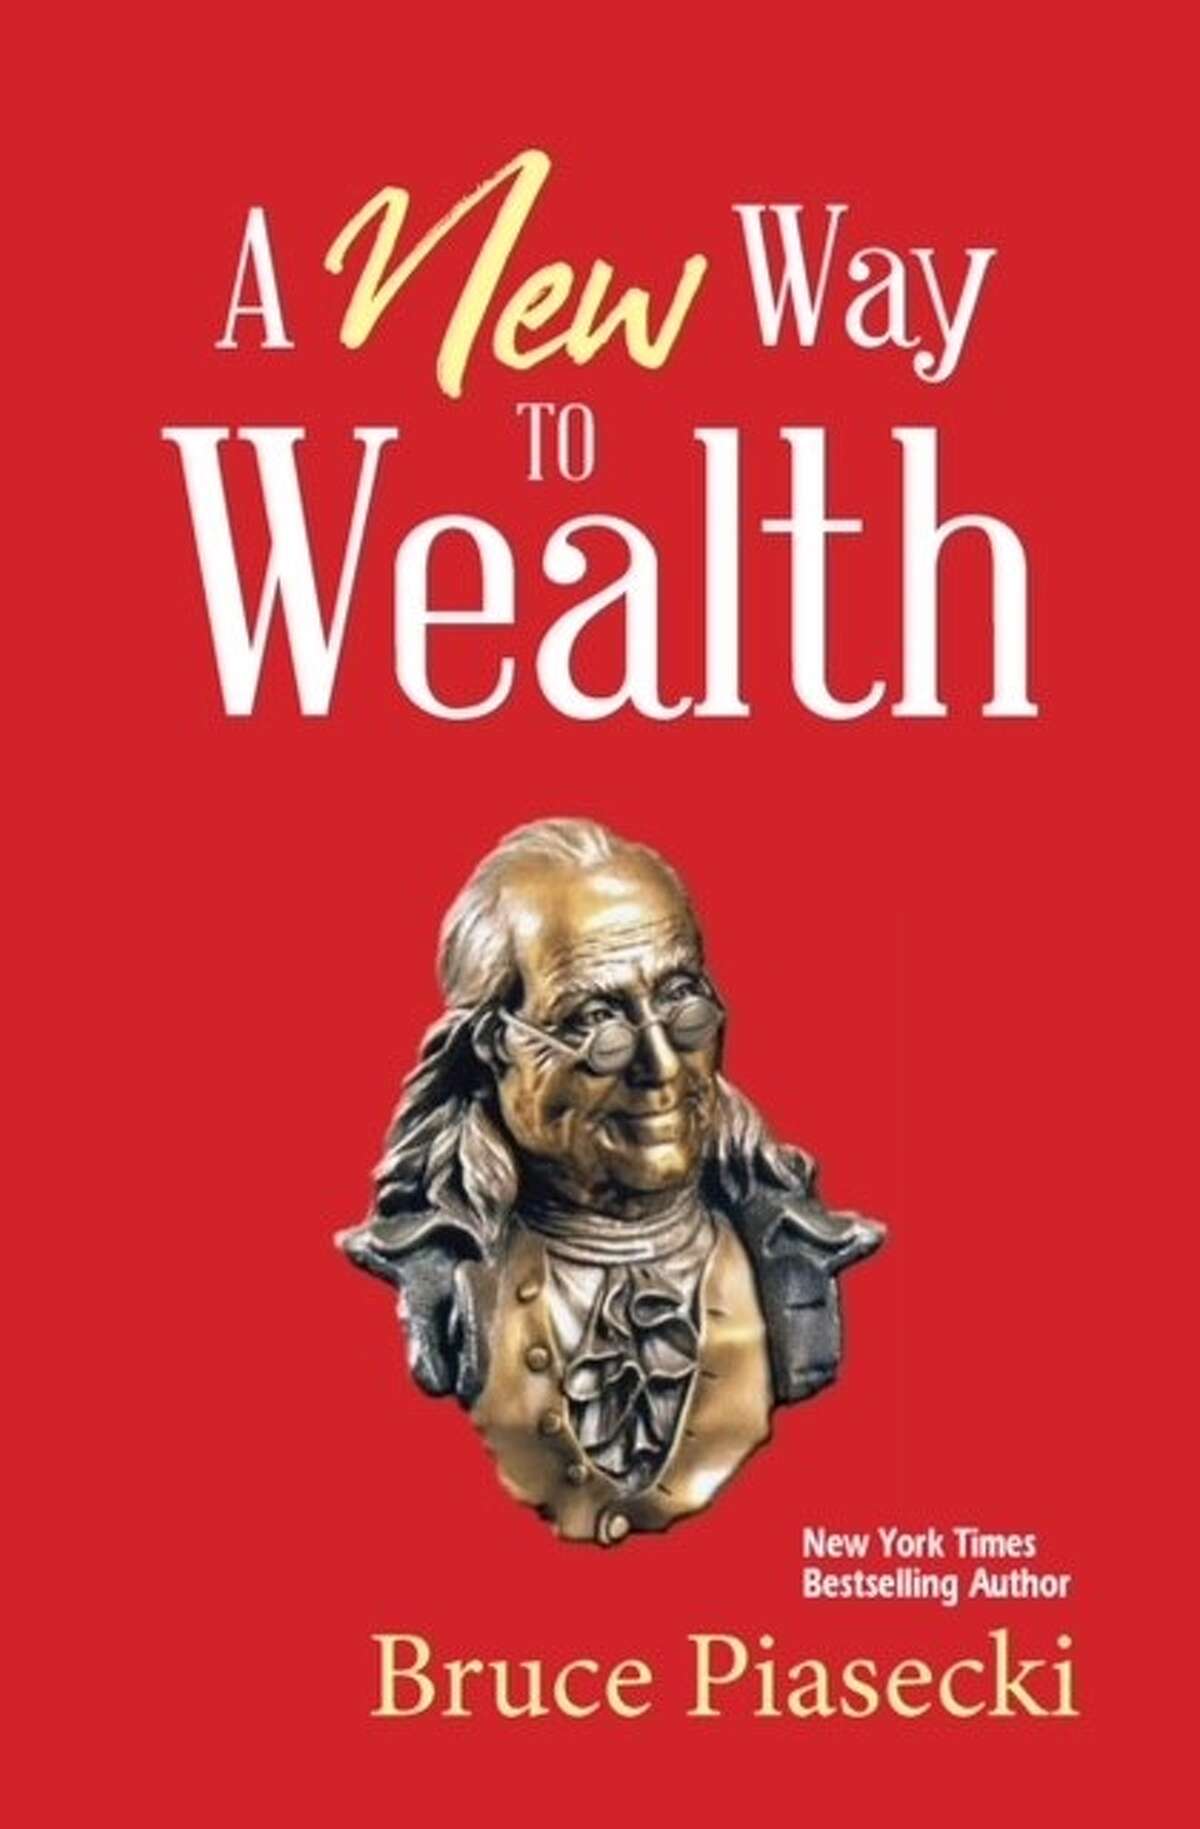 Bruce Piasecki, a Saratoga author and founder of a management-consulting firm based in Ballston Spa, recently came out with "A New Way to Wealth," inspired by his interpretation of Benjamin Franklin's teachings.